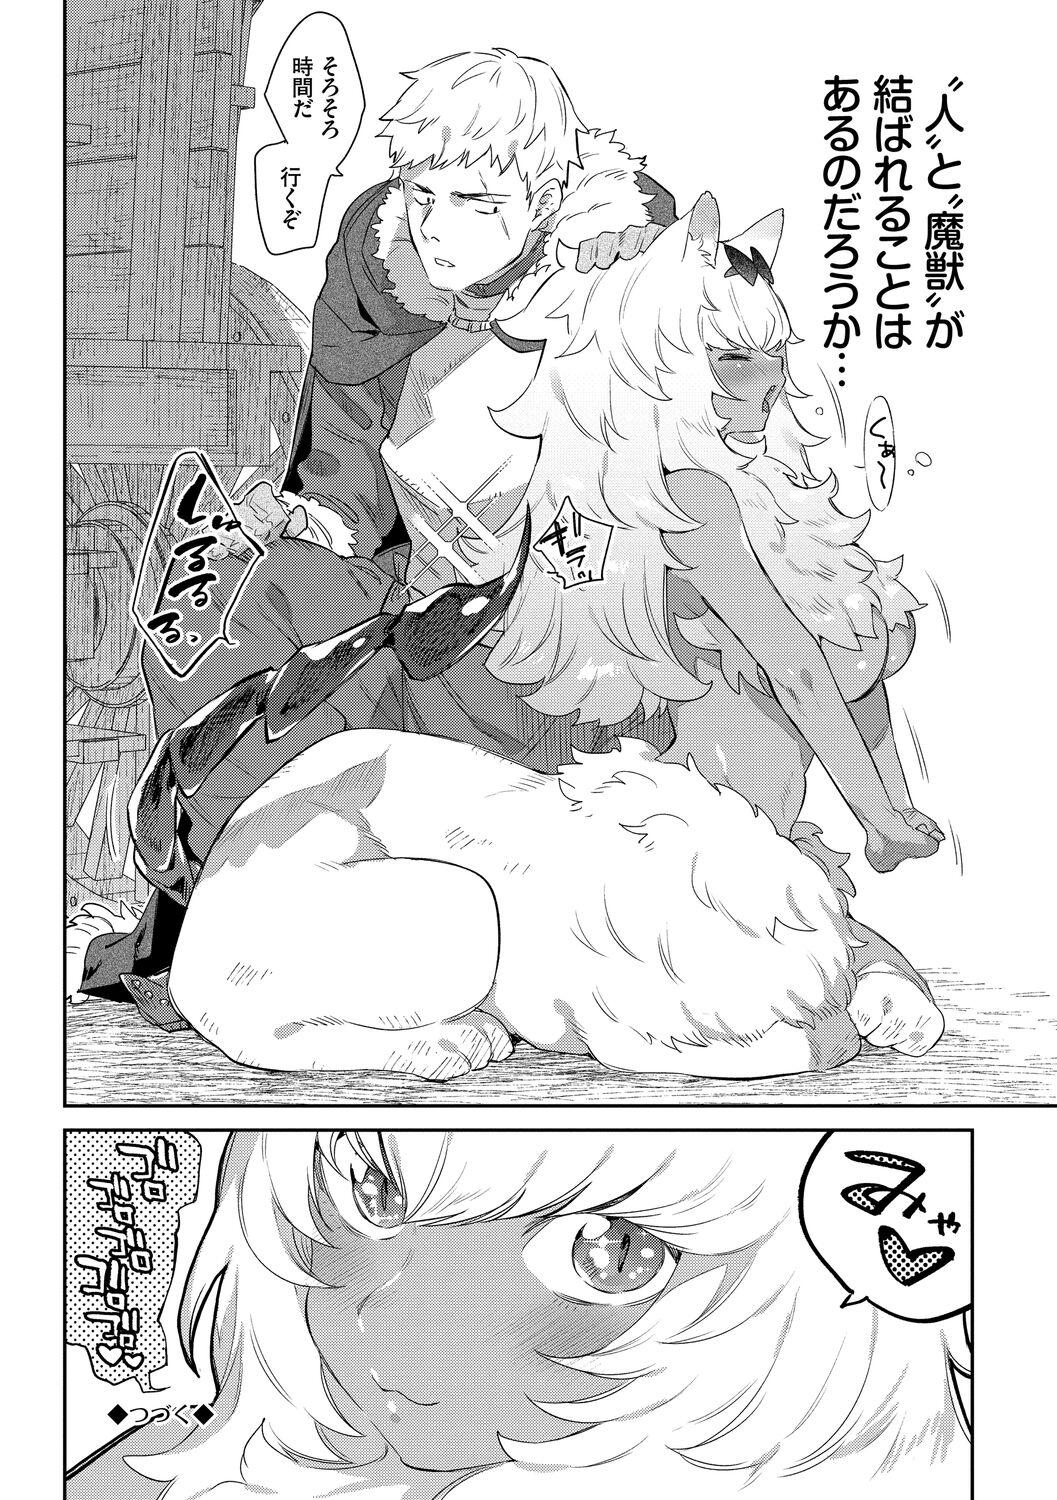 Ihou no Otome - Monster Girls in Another World 31